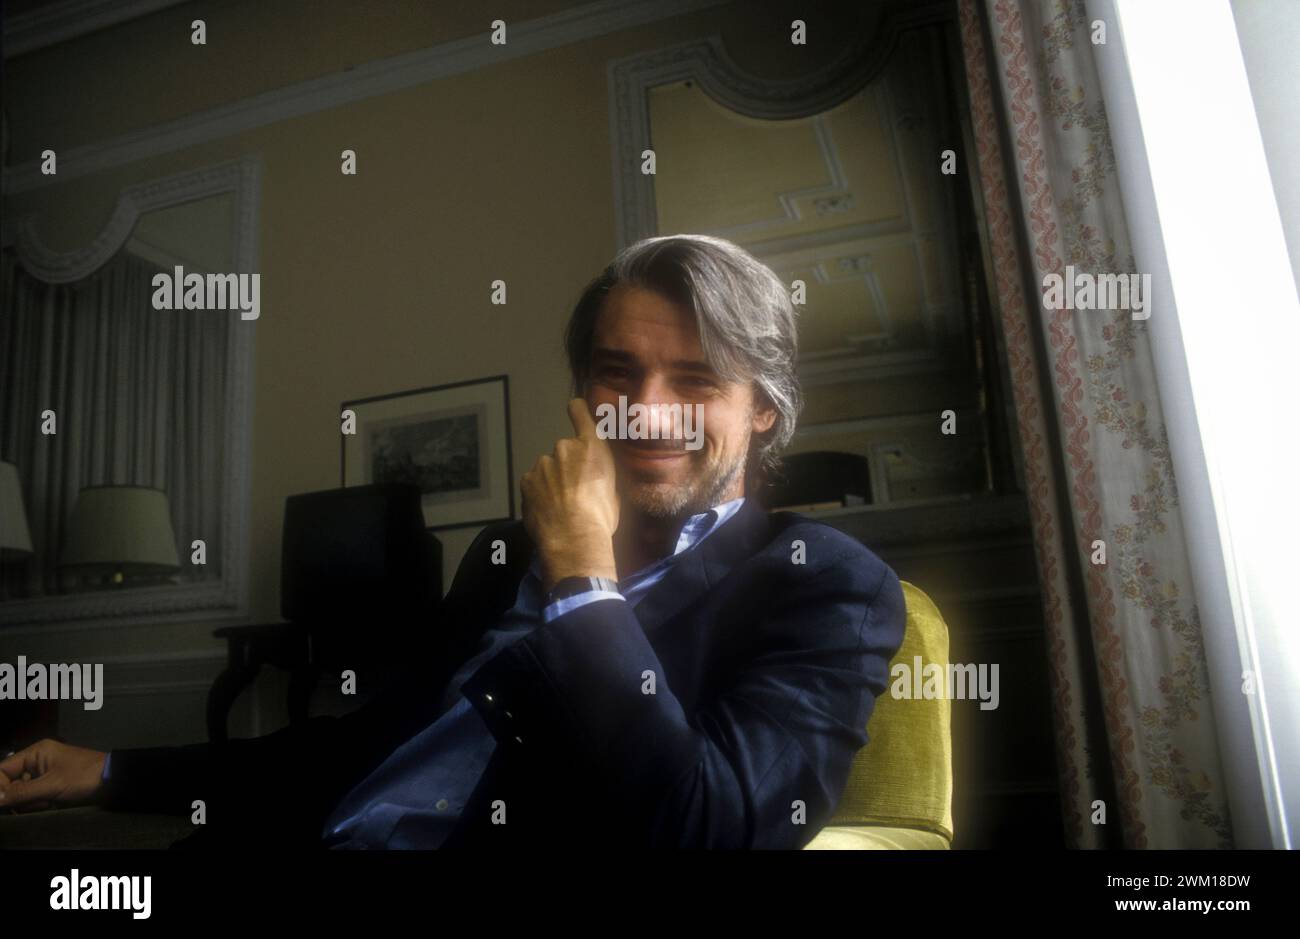 3833034 Ricky Tognazzi; (add.info.: Italian actor and director Ricky Tognazzi, 1992 / L'attore e regista Ricky Tognazzi, 1992); © Marcello Mencarini. All rights reserved 2024. Stock Photo